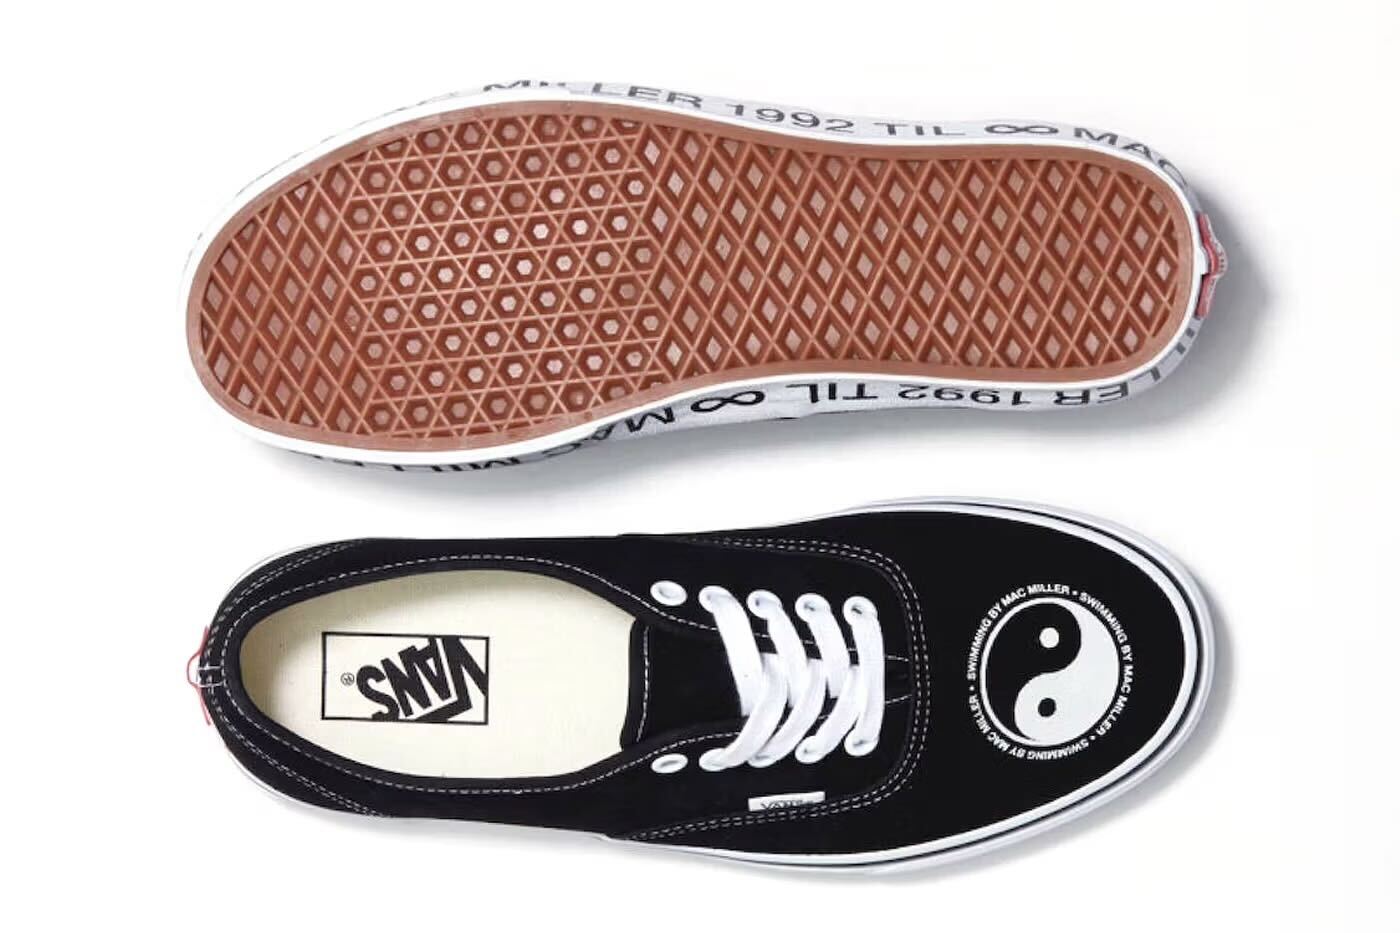 Vans launched some sneakers to honor Mac Miller's 'Swimming' (and here we tell you how to put them together)